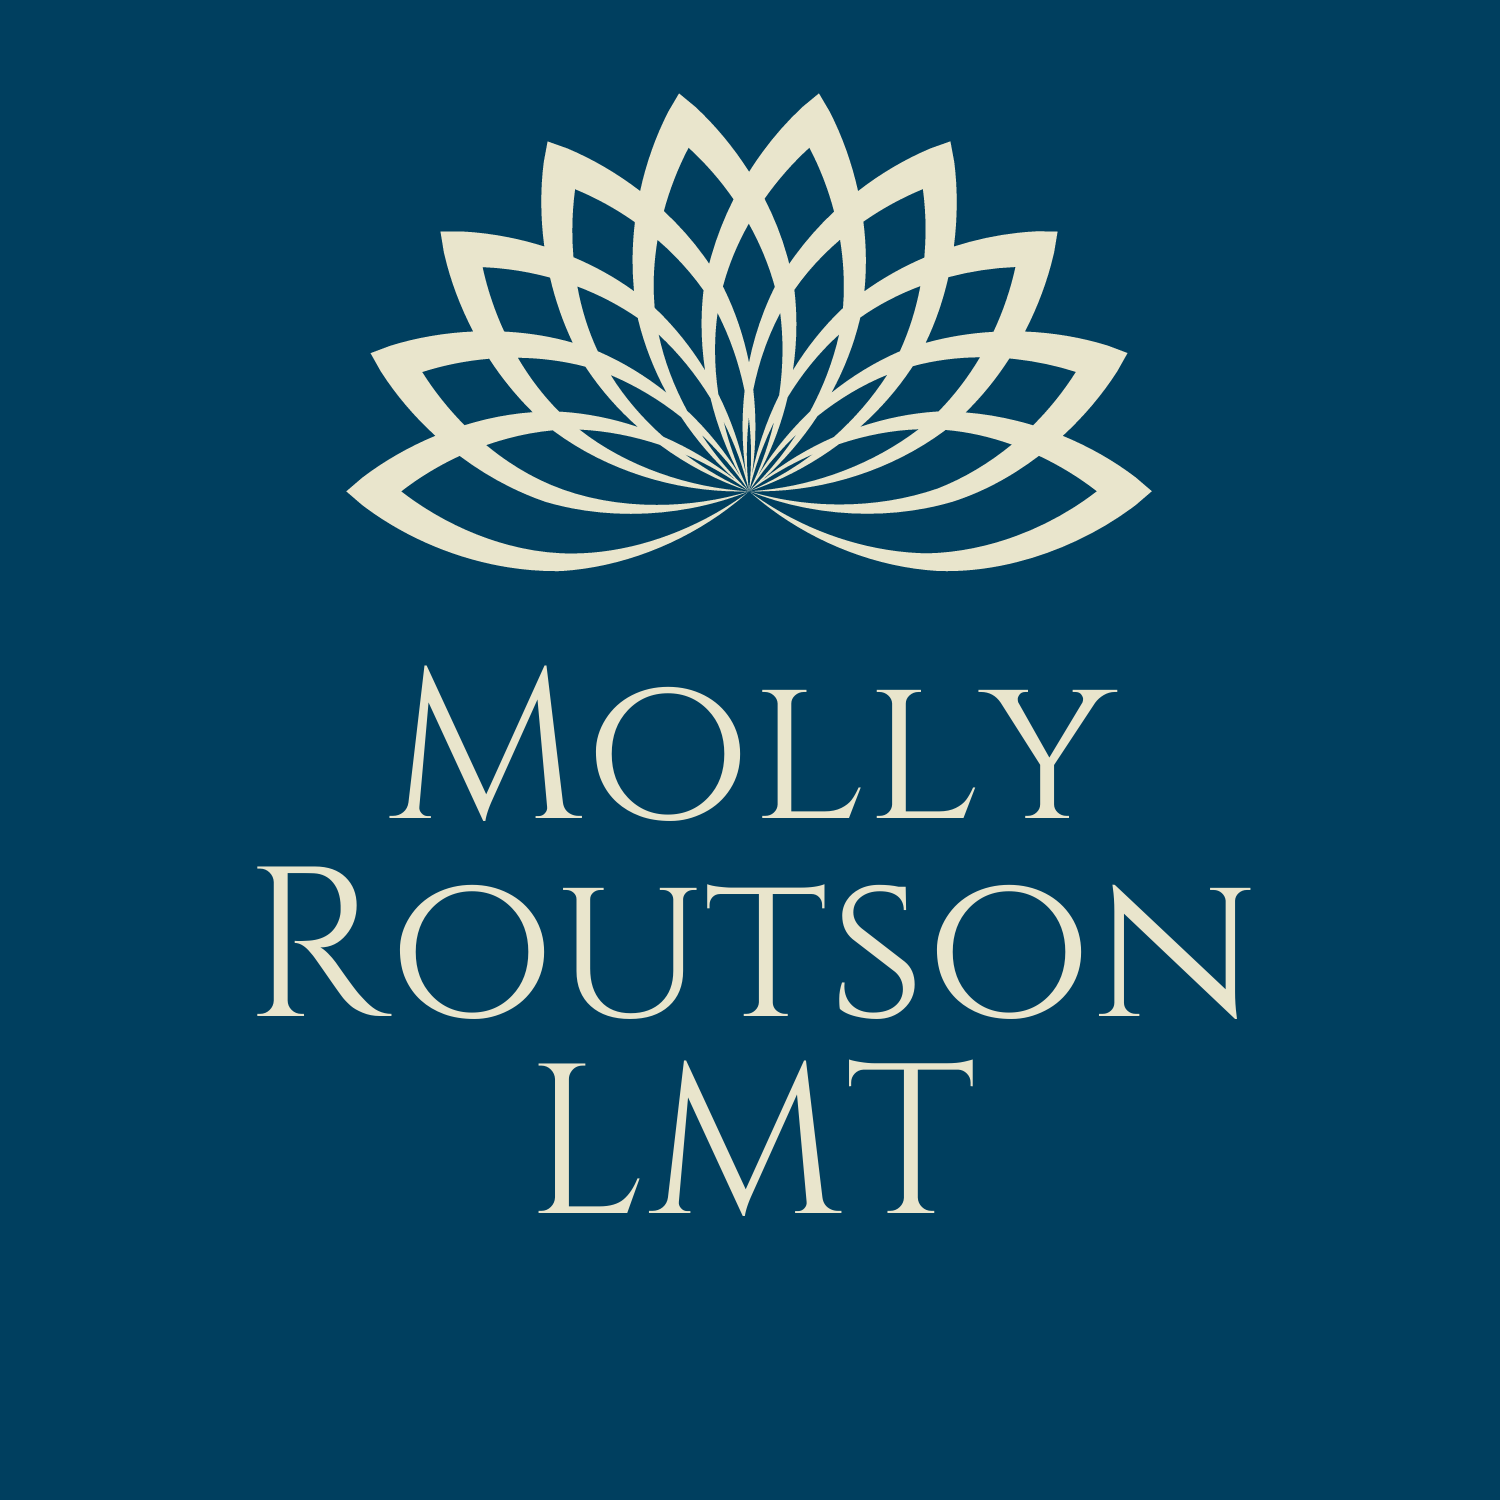 Molly Routson, LMT. – Oregon Frontier Chamber